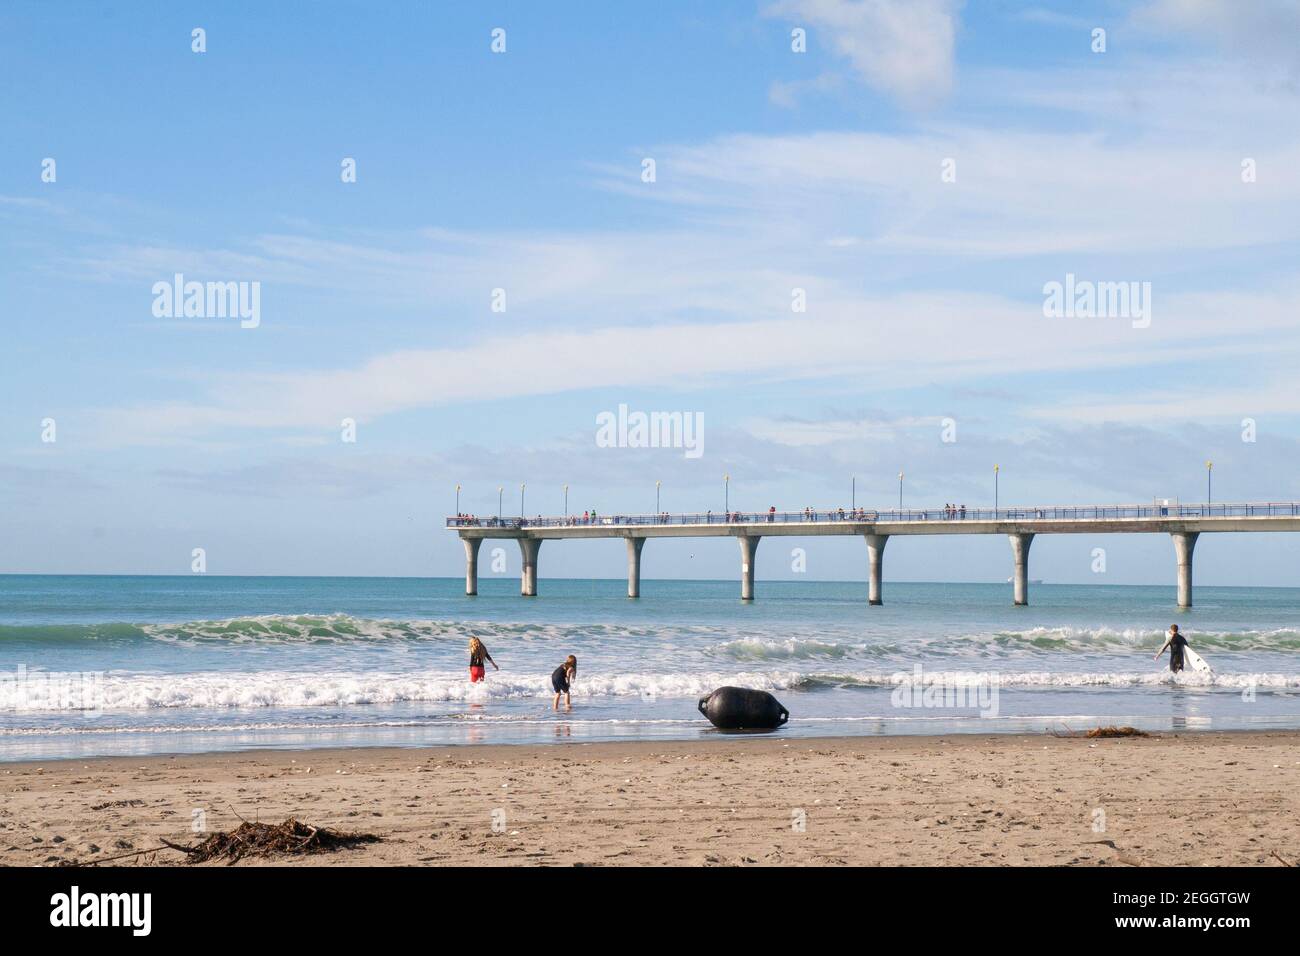 New Brighton Pier, childreen are playing in the waves, Christchurch, South Island New Zealand Stock Photo